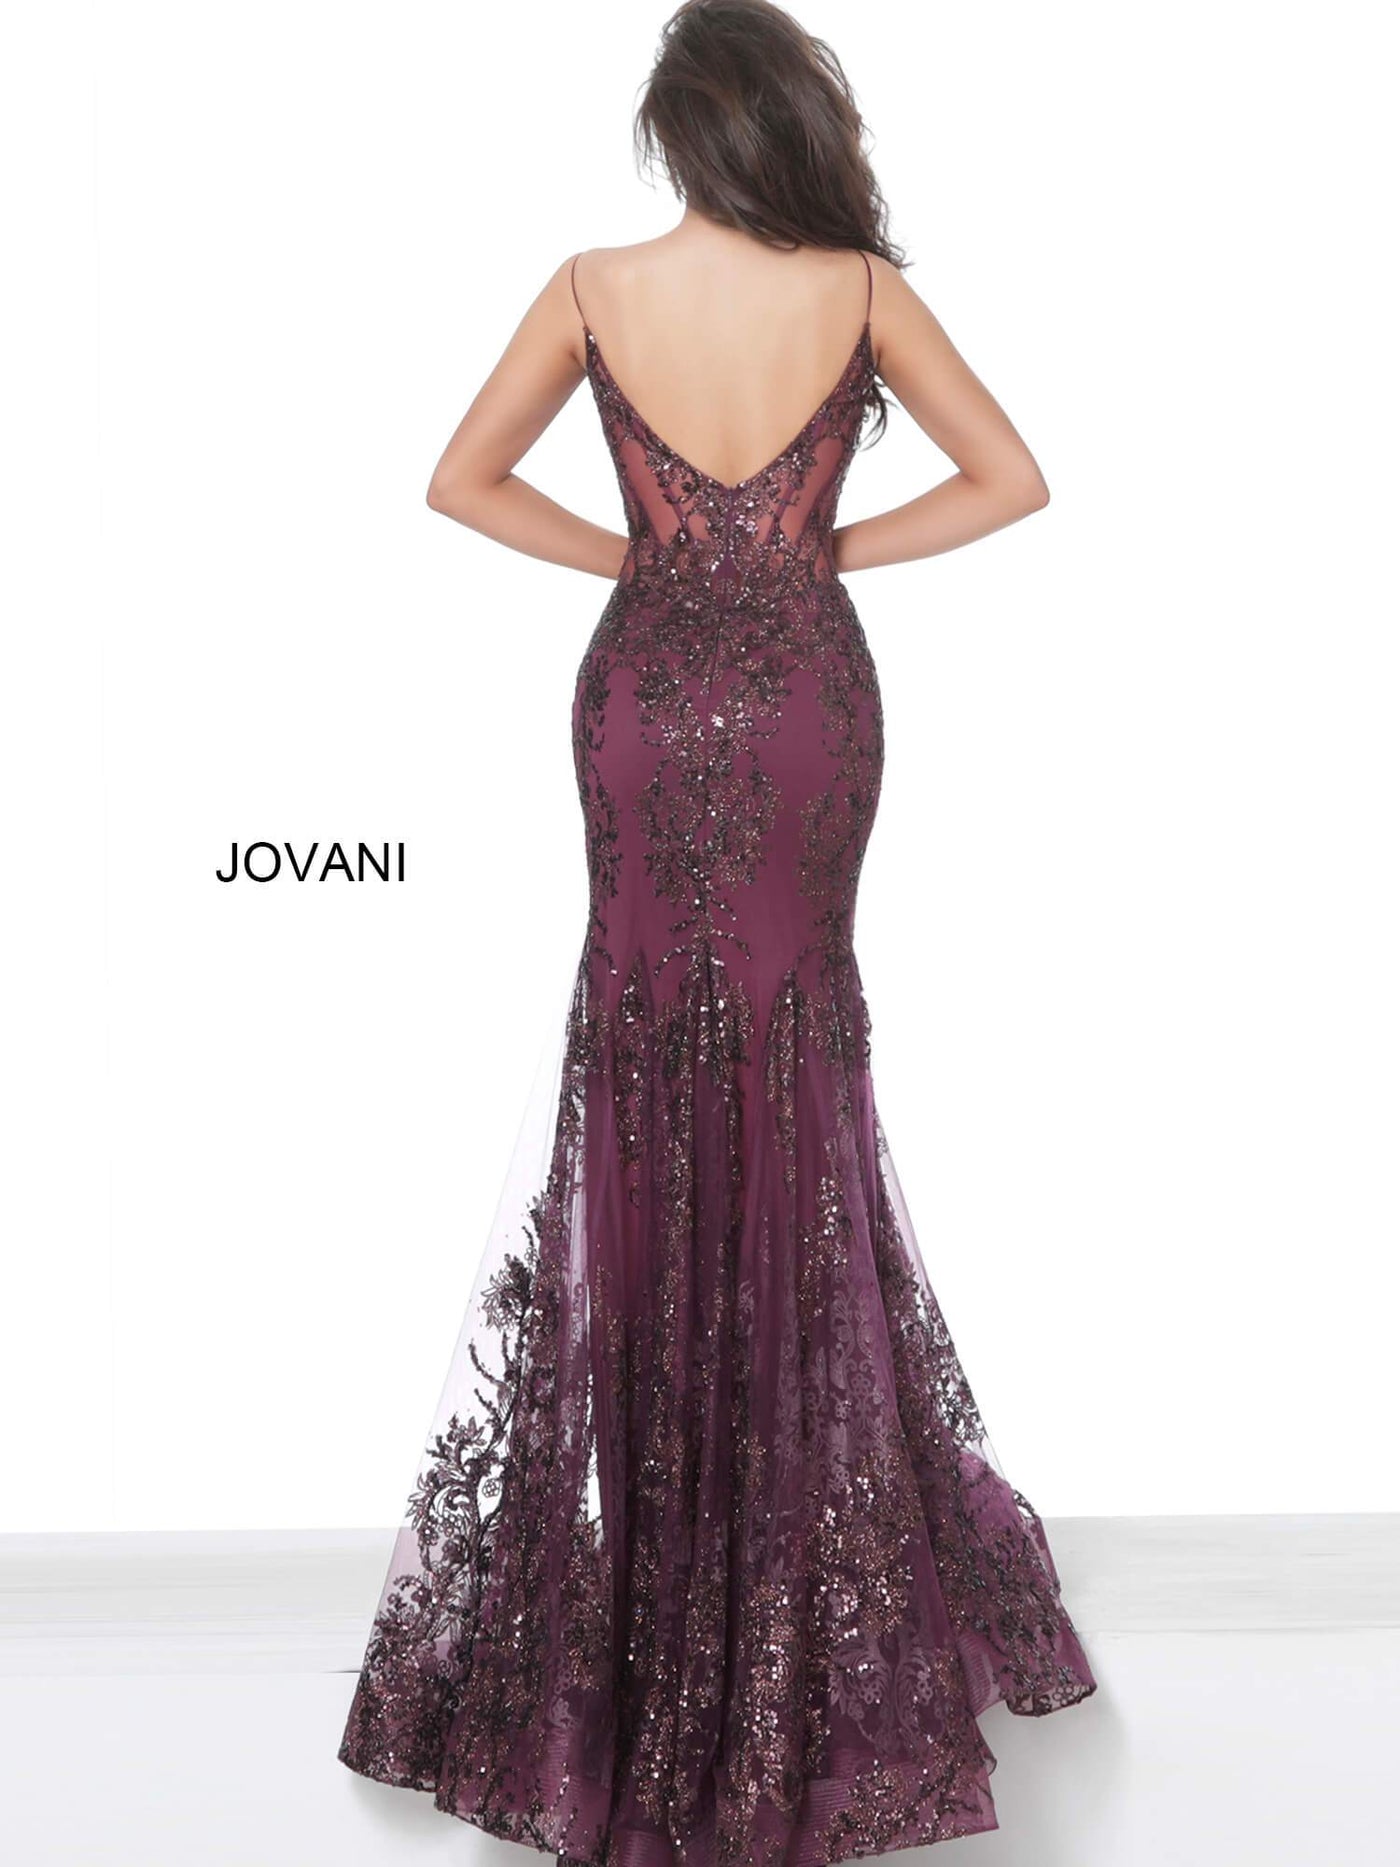 Jovani - 3675 Sequined Illusion Corset Mermaid Gown Pageant Dresses 00 / Eggplant